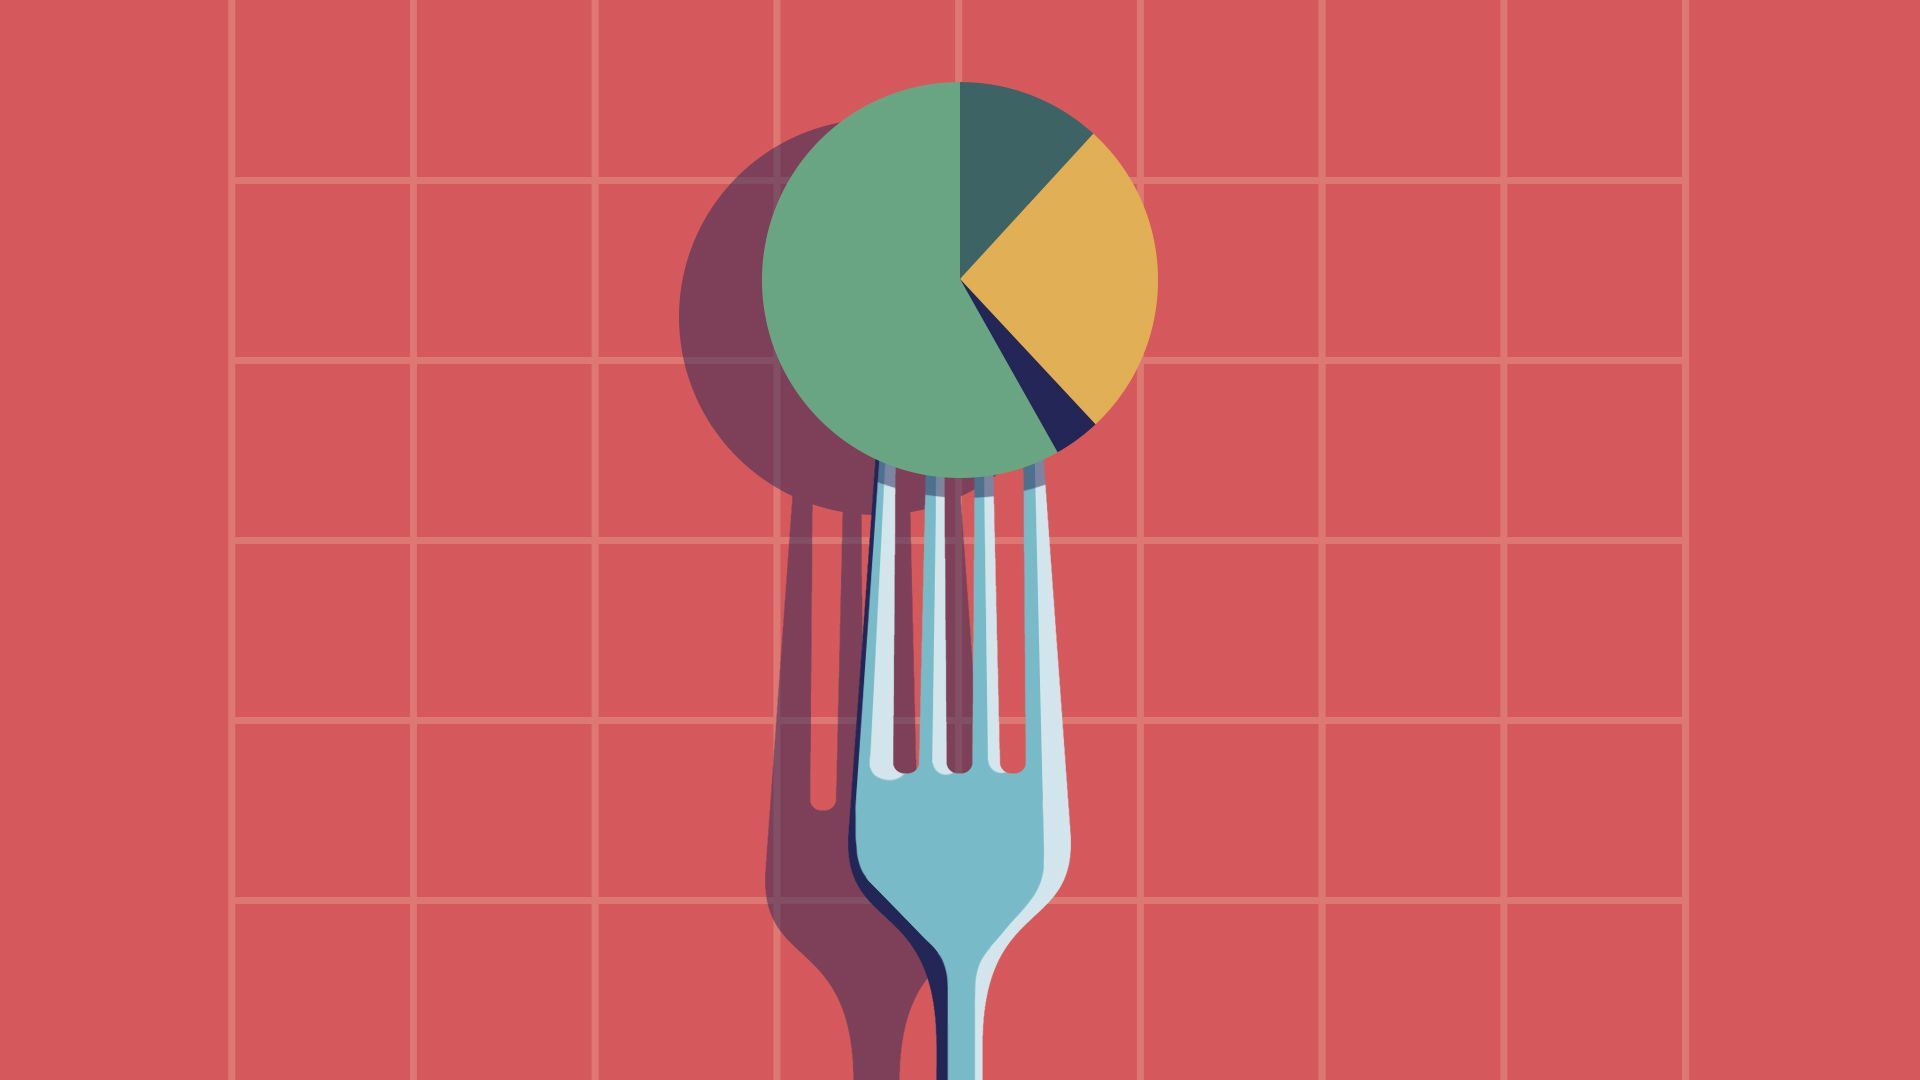 Illustration of a fork holding a pie chart 